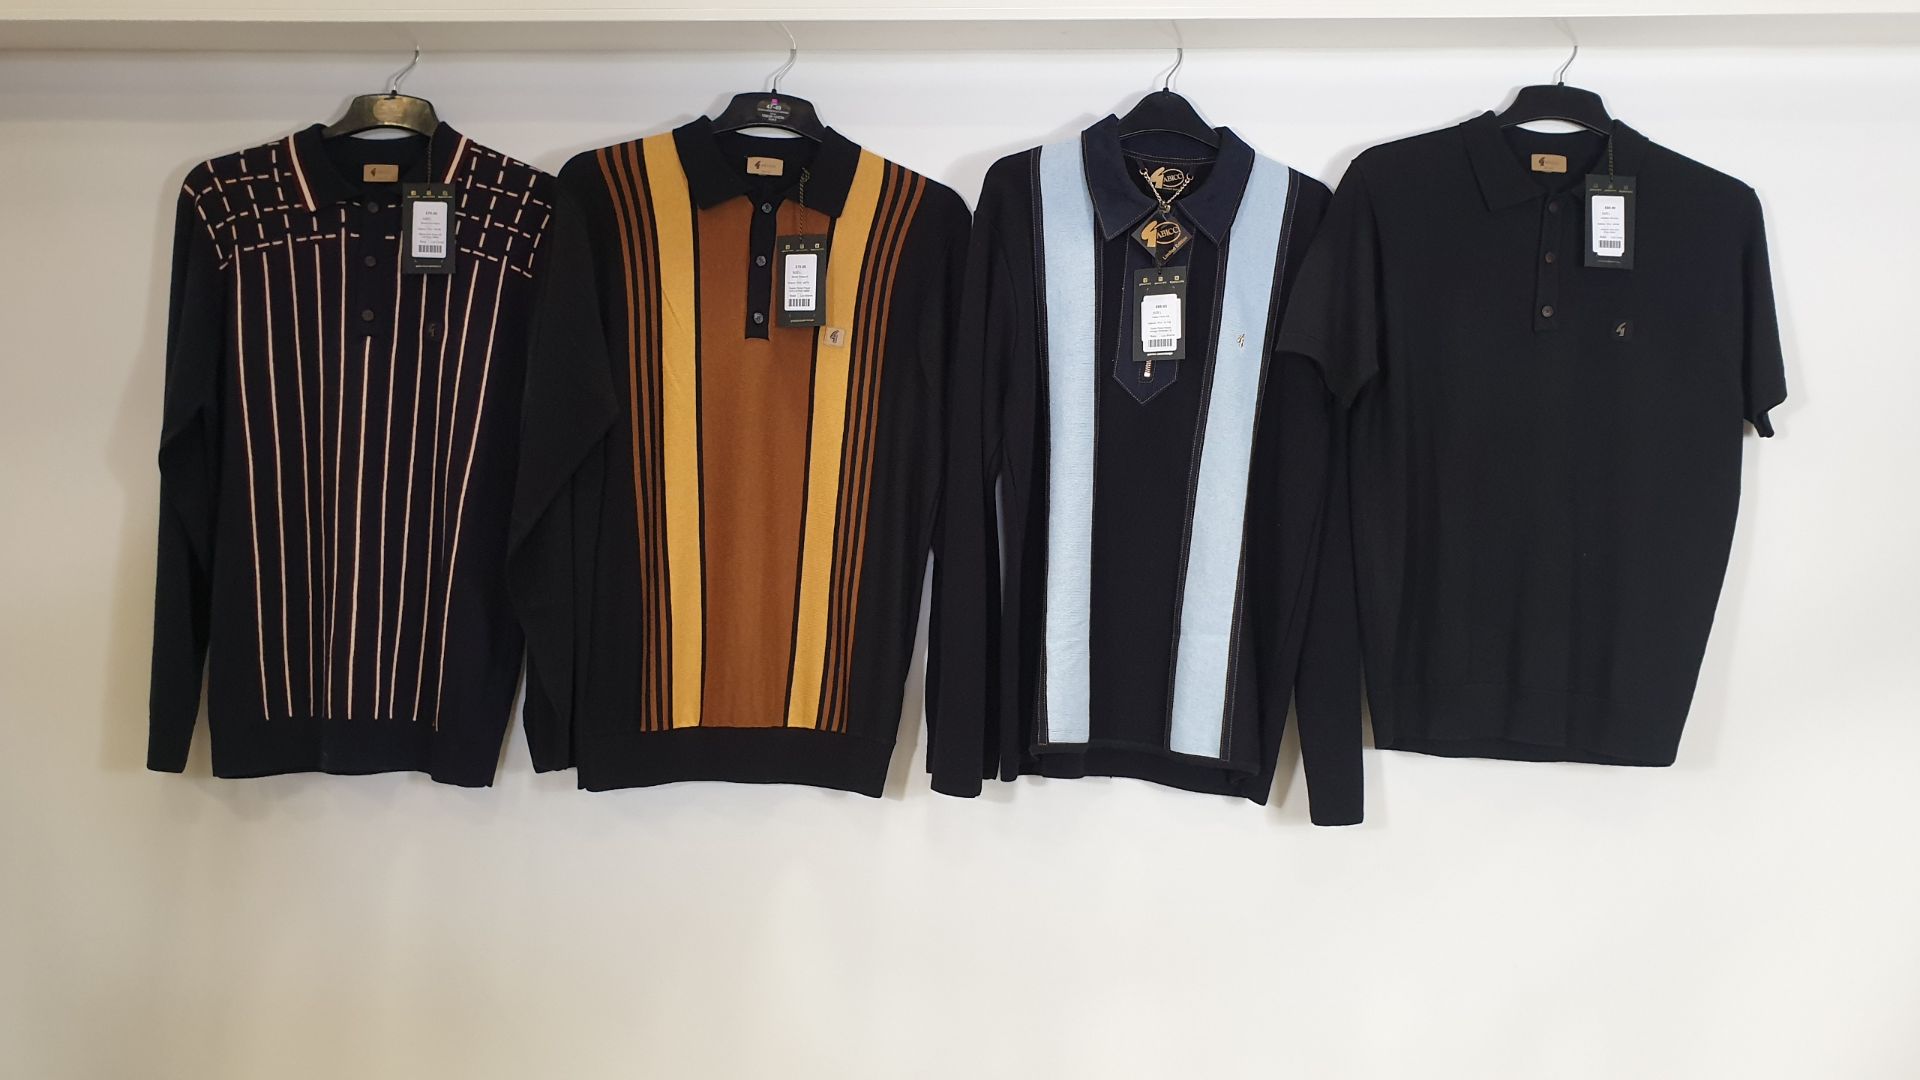 4 PIECE GABICCI LOT INCLUDES - SEARLE STRIPED KNIT BLACK AND YELLOW POLO - L £70.00 - BIOME KNIT